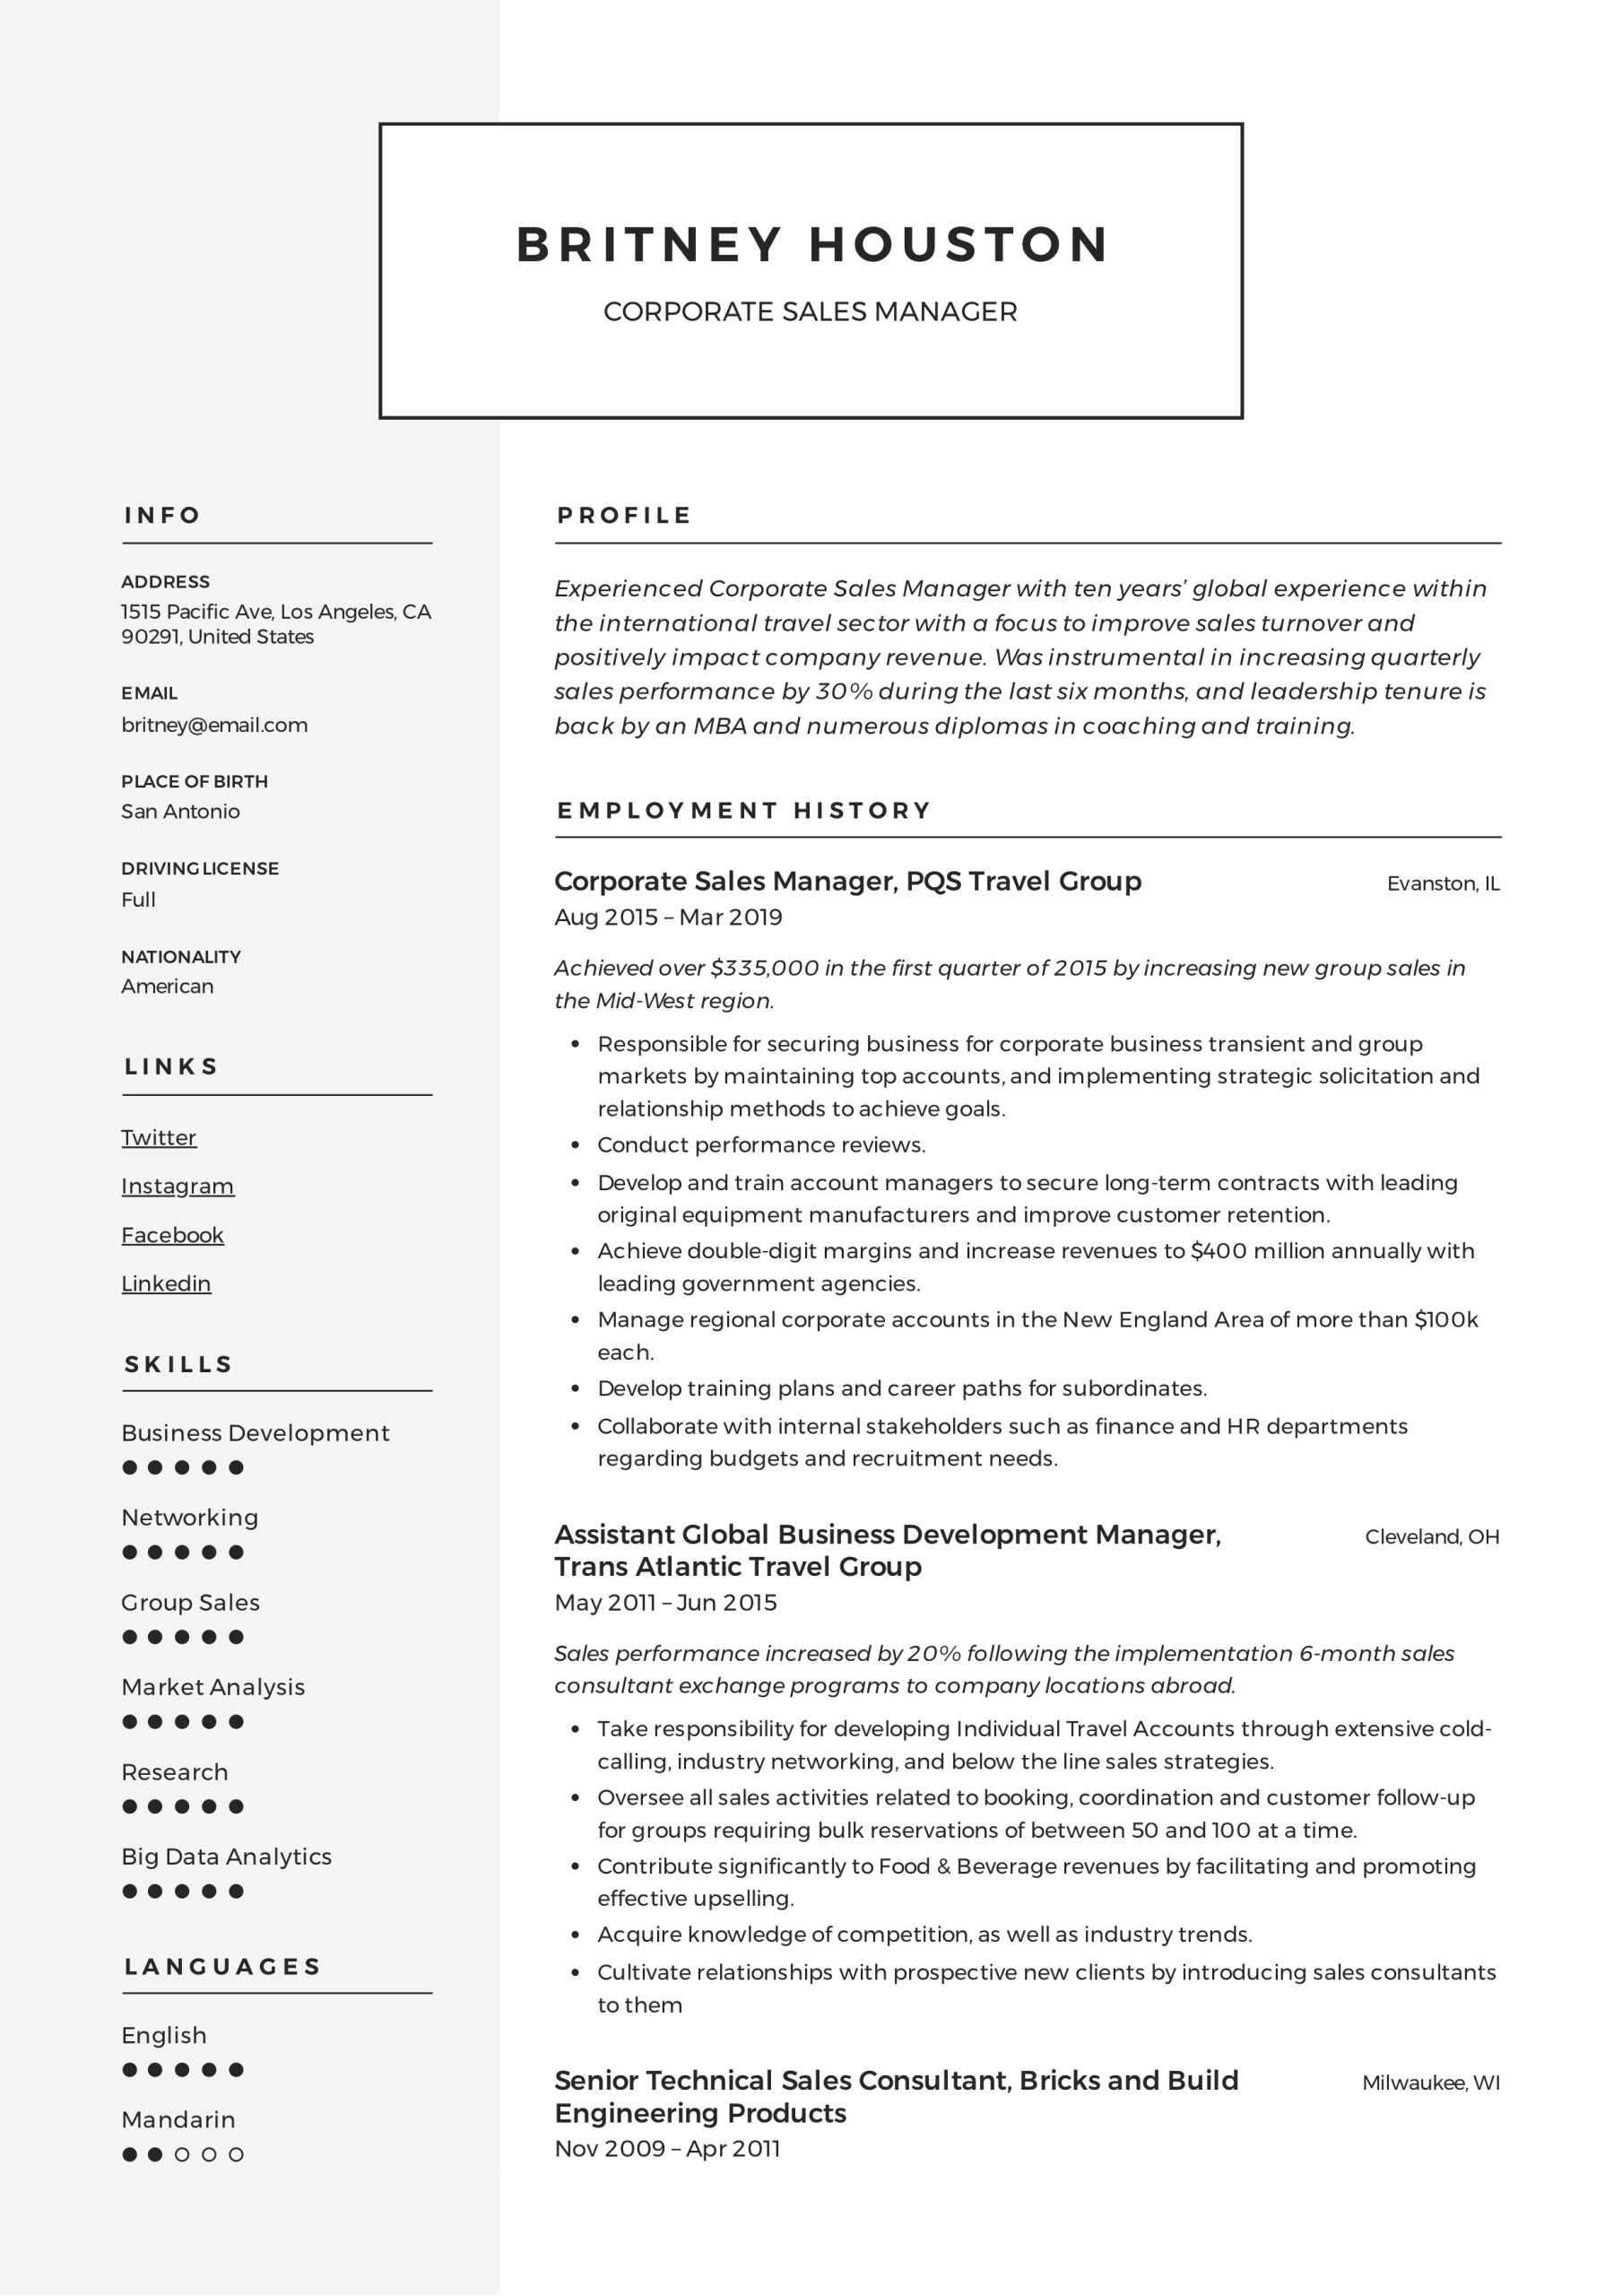 Resume Summary Samples for A Sales Manager Corporate Sales Manager Resume & Guide 12 Examples Pdf 2022